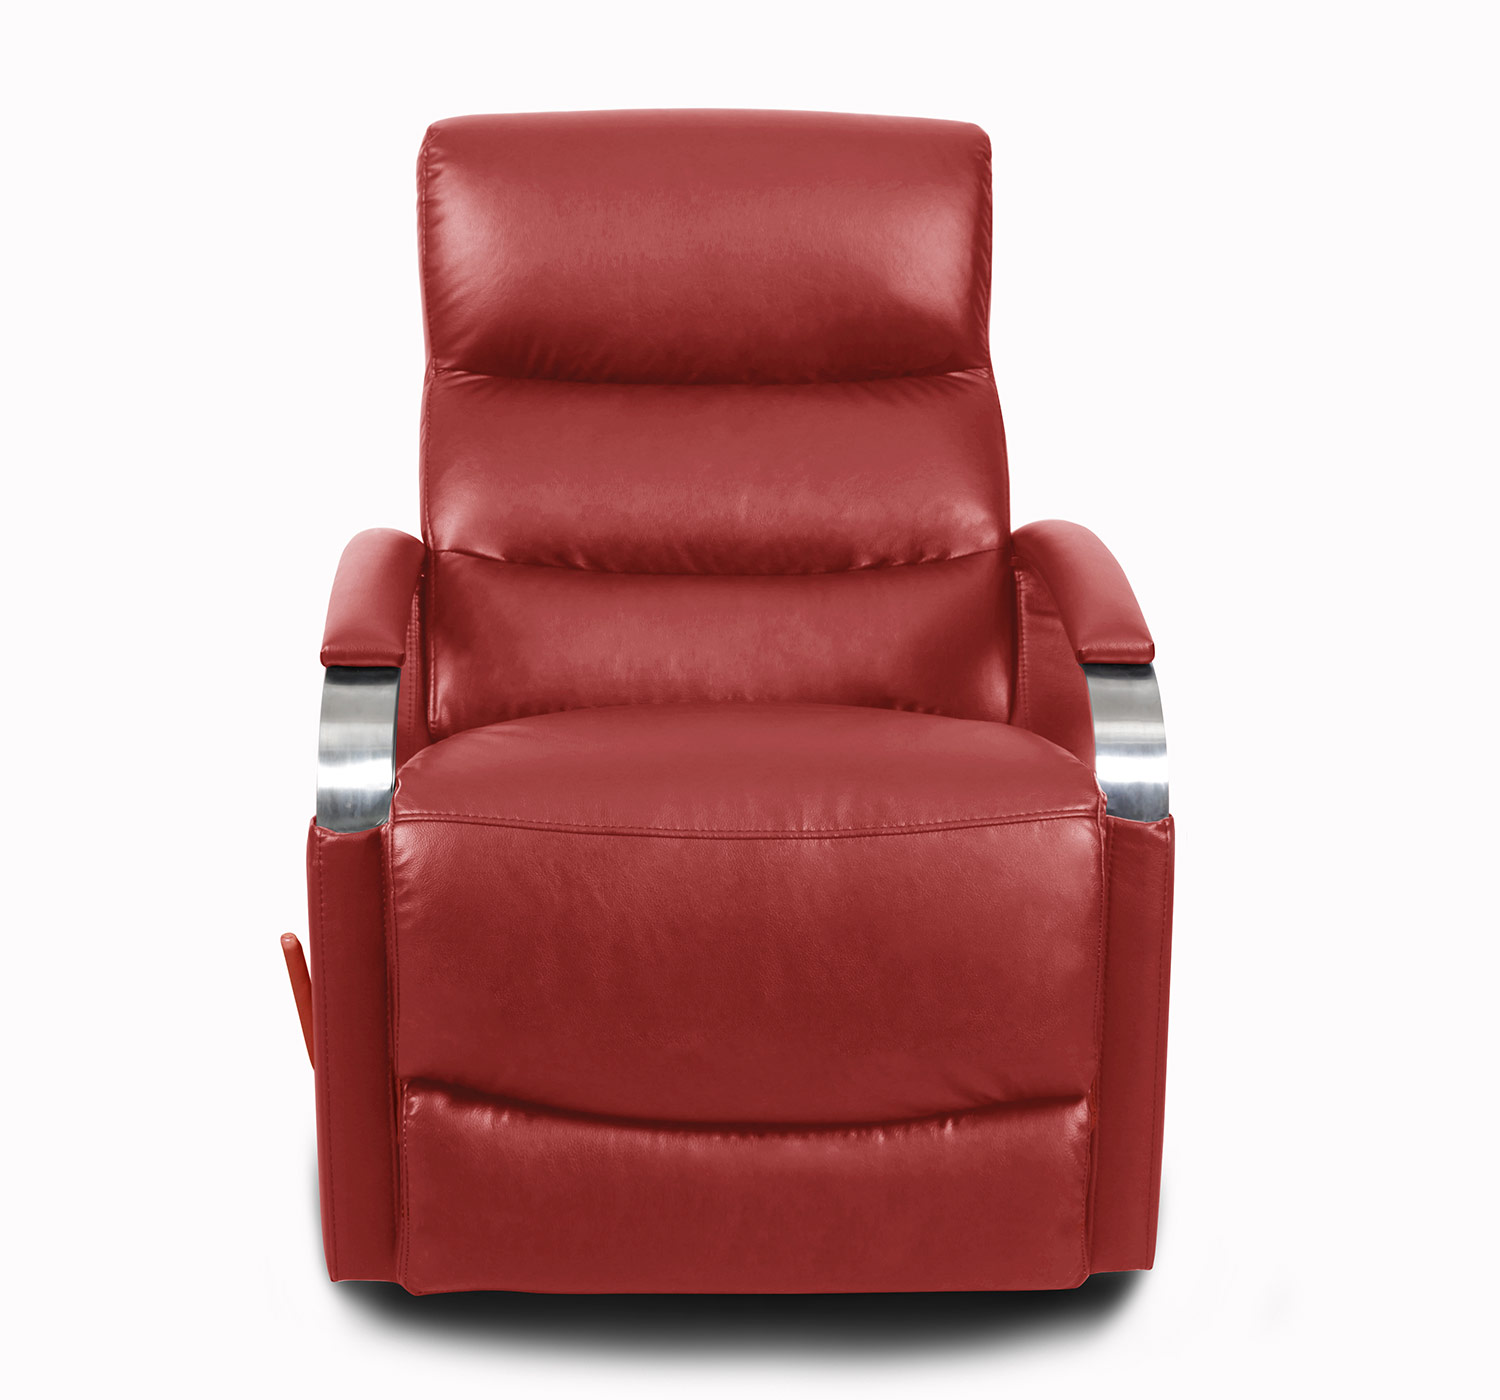 Barcalounger Shadow Swivel Glider Recliner Chair - Contact Red/Leather Match